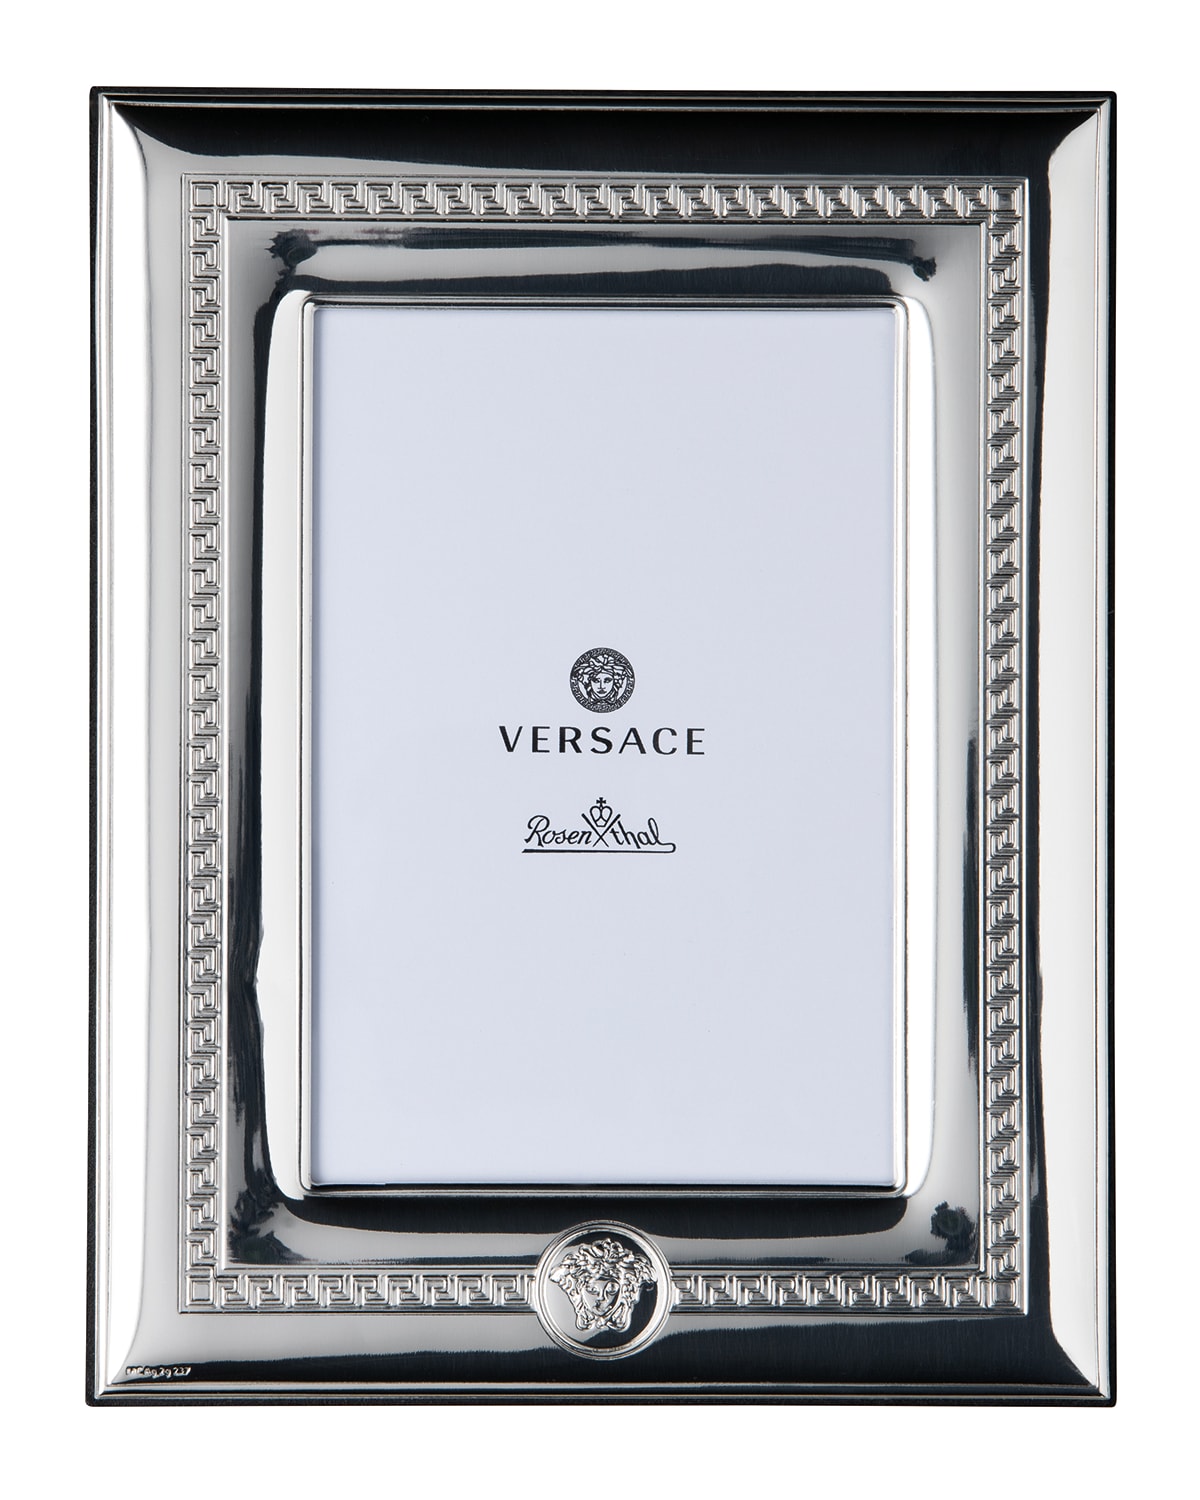 Versace Silver Plate Photo Frame, 4" X 6"